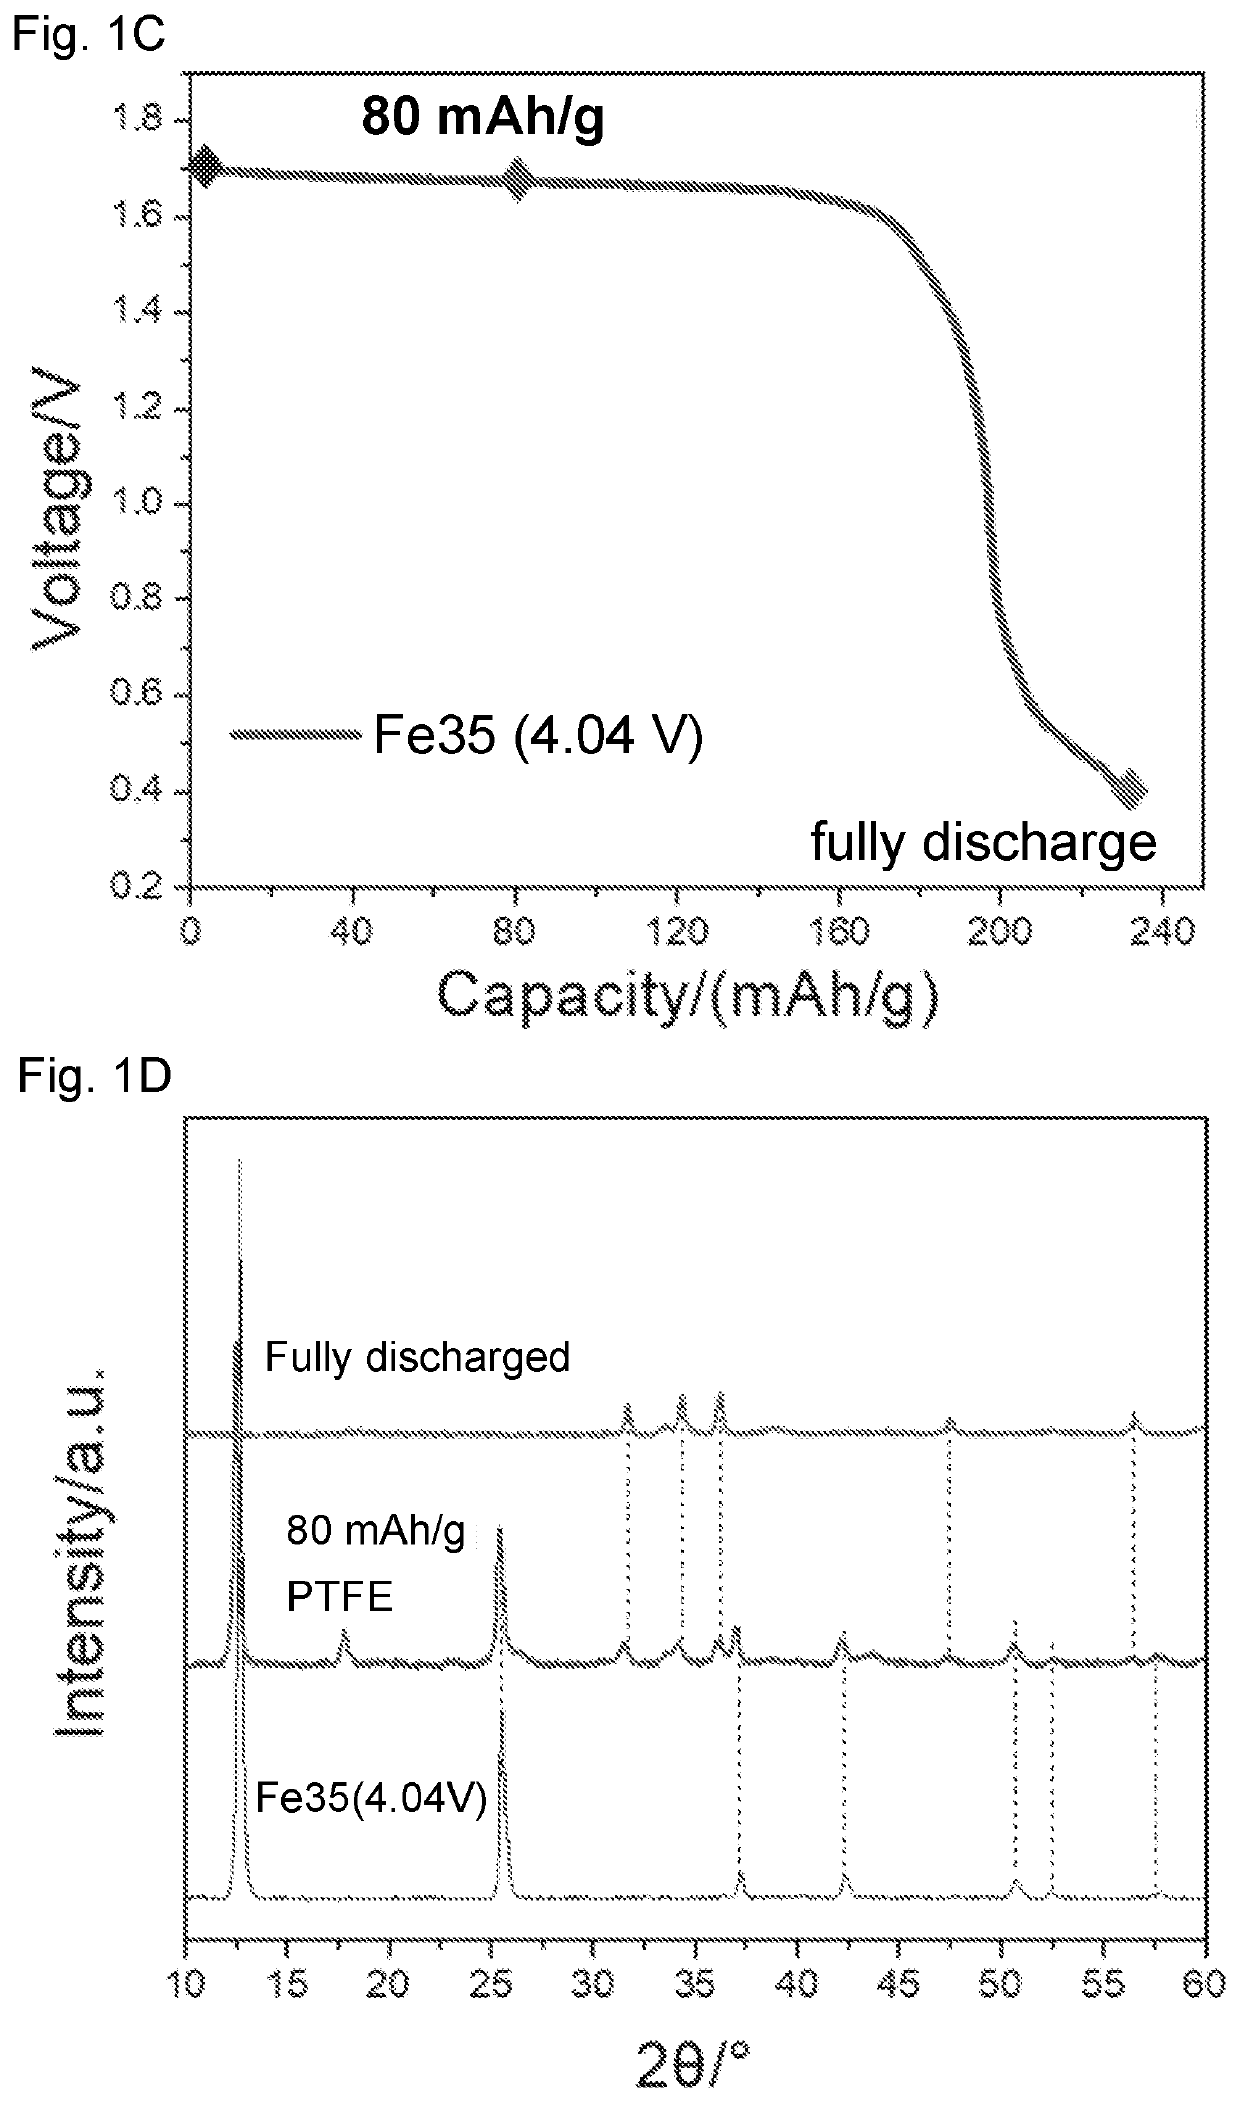 Desodiated sodium transition metal oxides for primary batteries